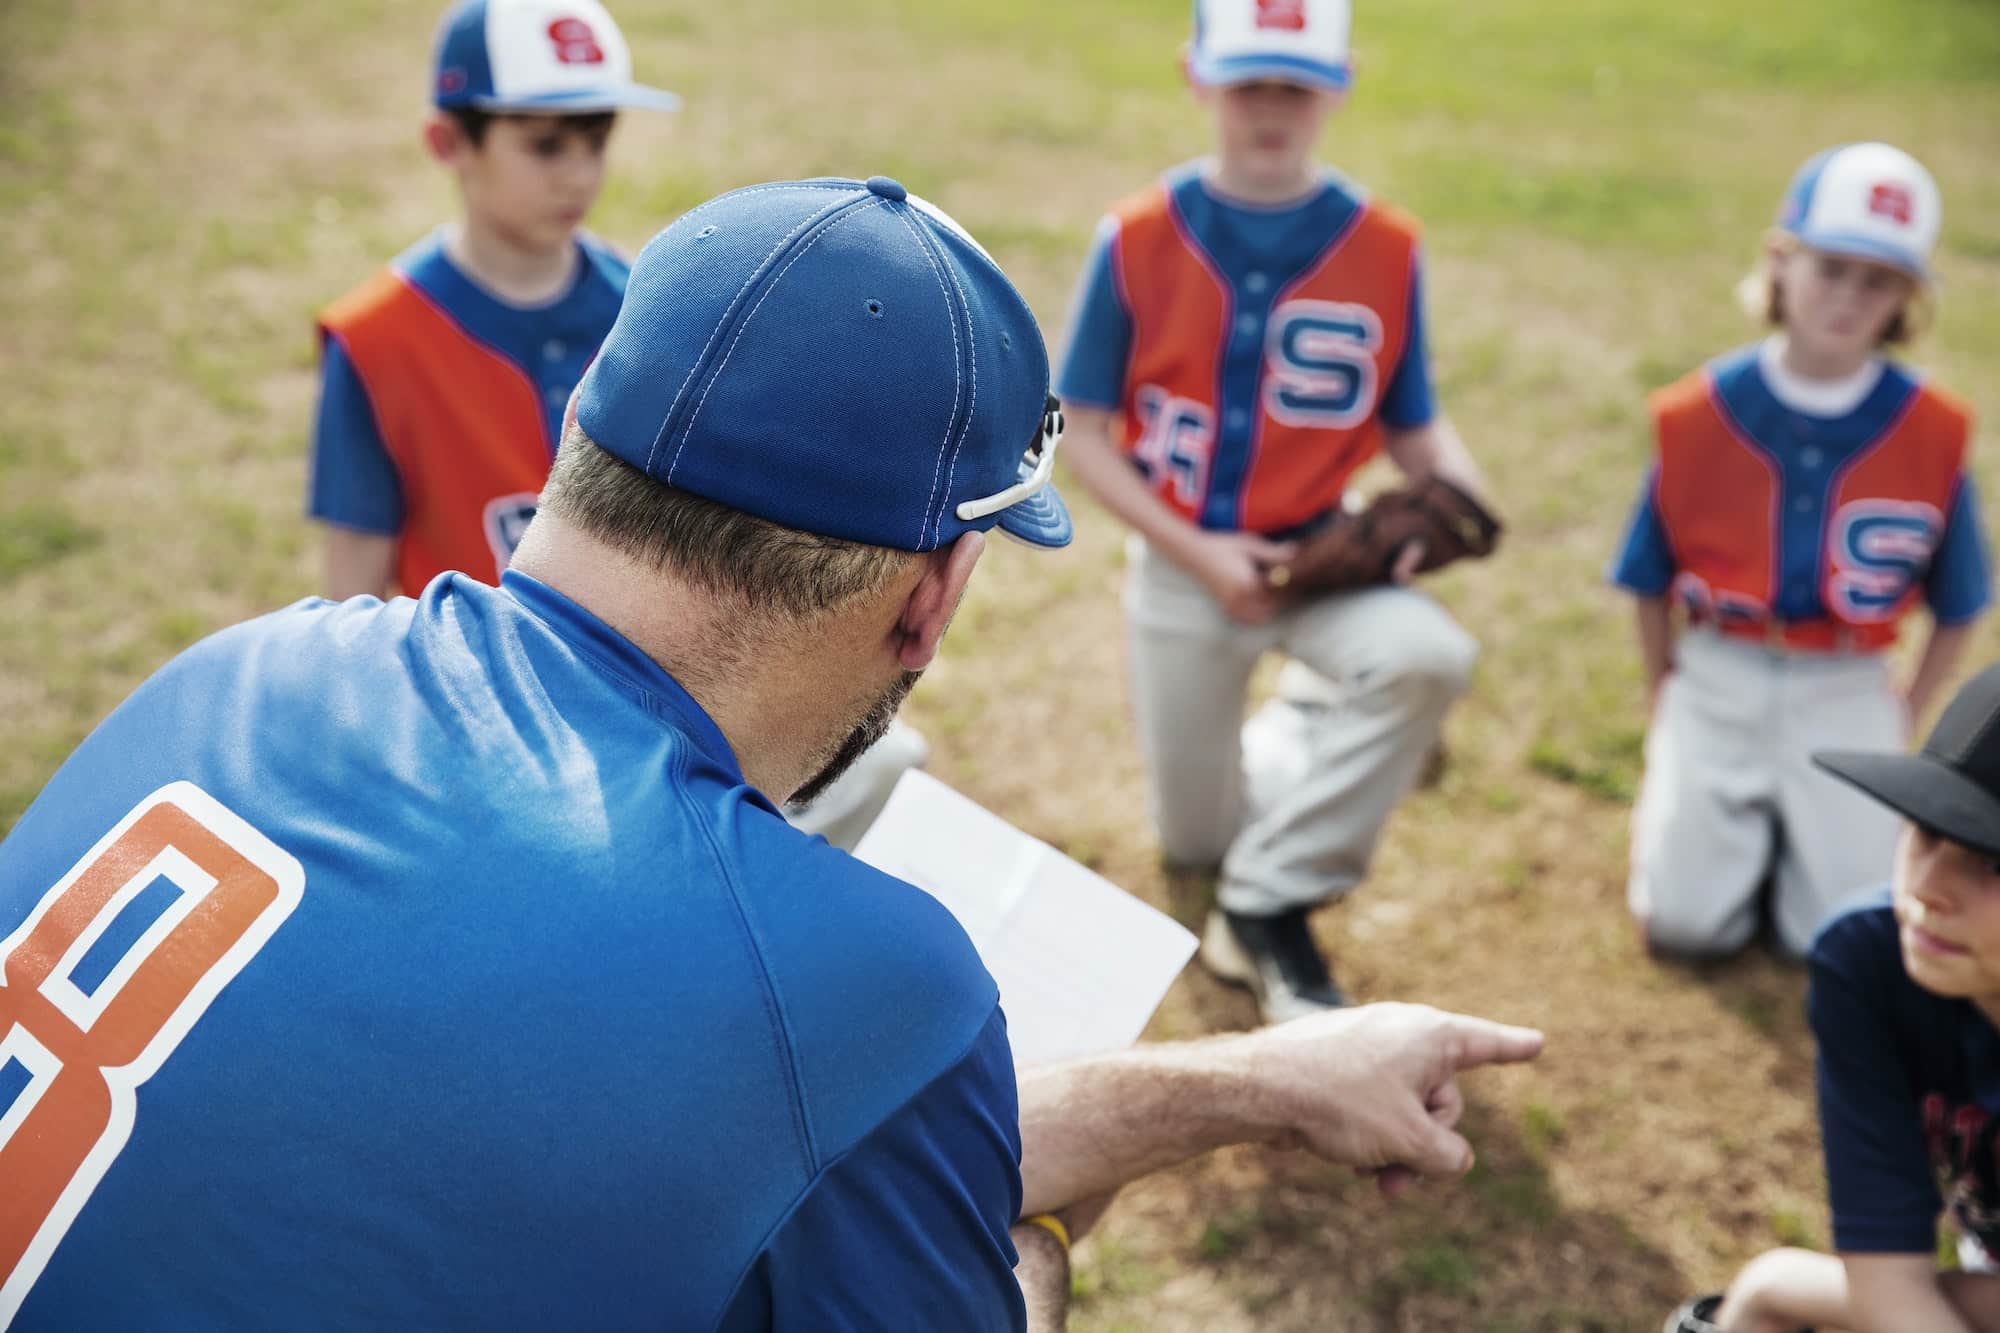 Rear View Of Coach Pointing While Discussing With Baseball Team On Field